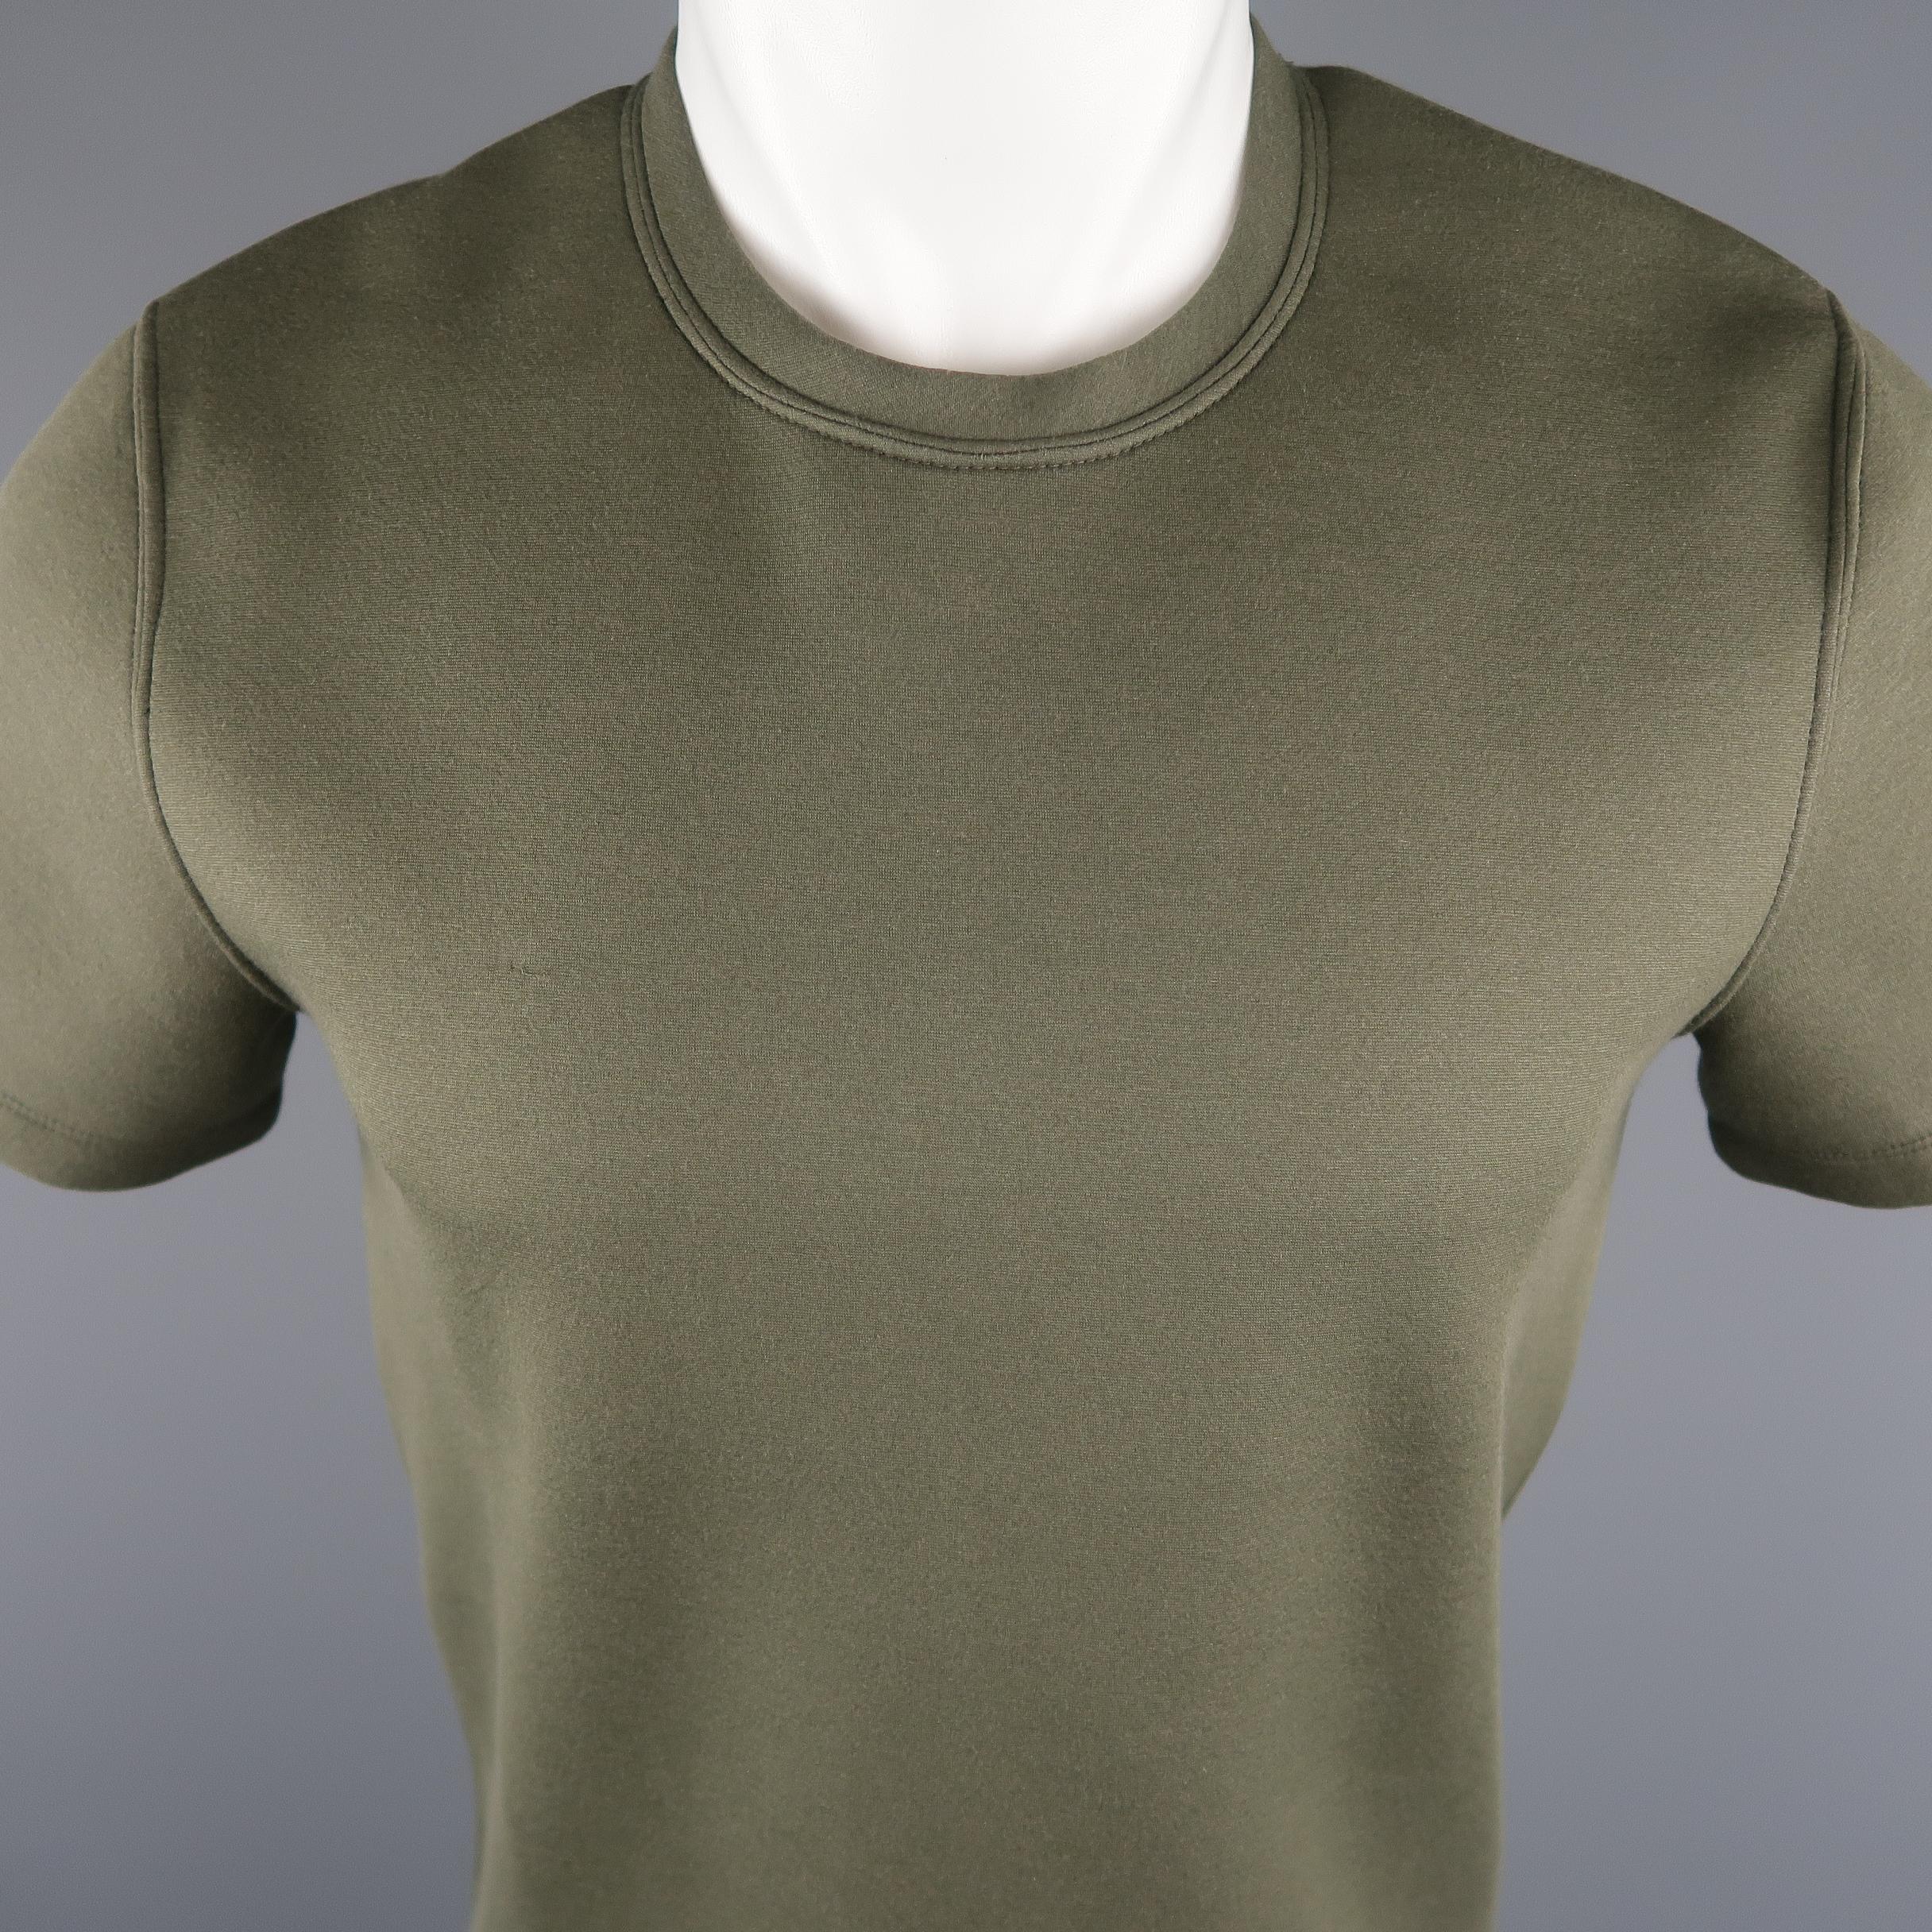 CALVIN KLEIN COLLECTION T-shirt comes in an olive solid cotton blend, with a crewneck and a detail on the shoulders. Made in Italy.
 
New with Tags.
Marked: S
 
Measurements:
 
Shoulder: 16 in.
Chest: 39 in.
Sleeve: 8 in.
Length: 25 in.